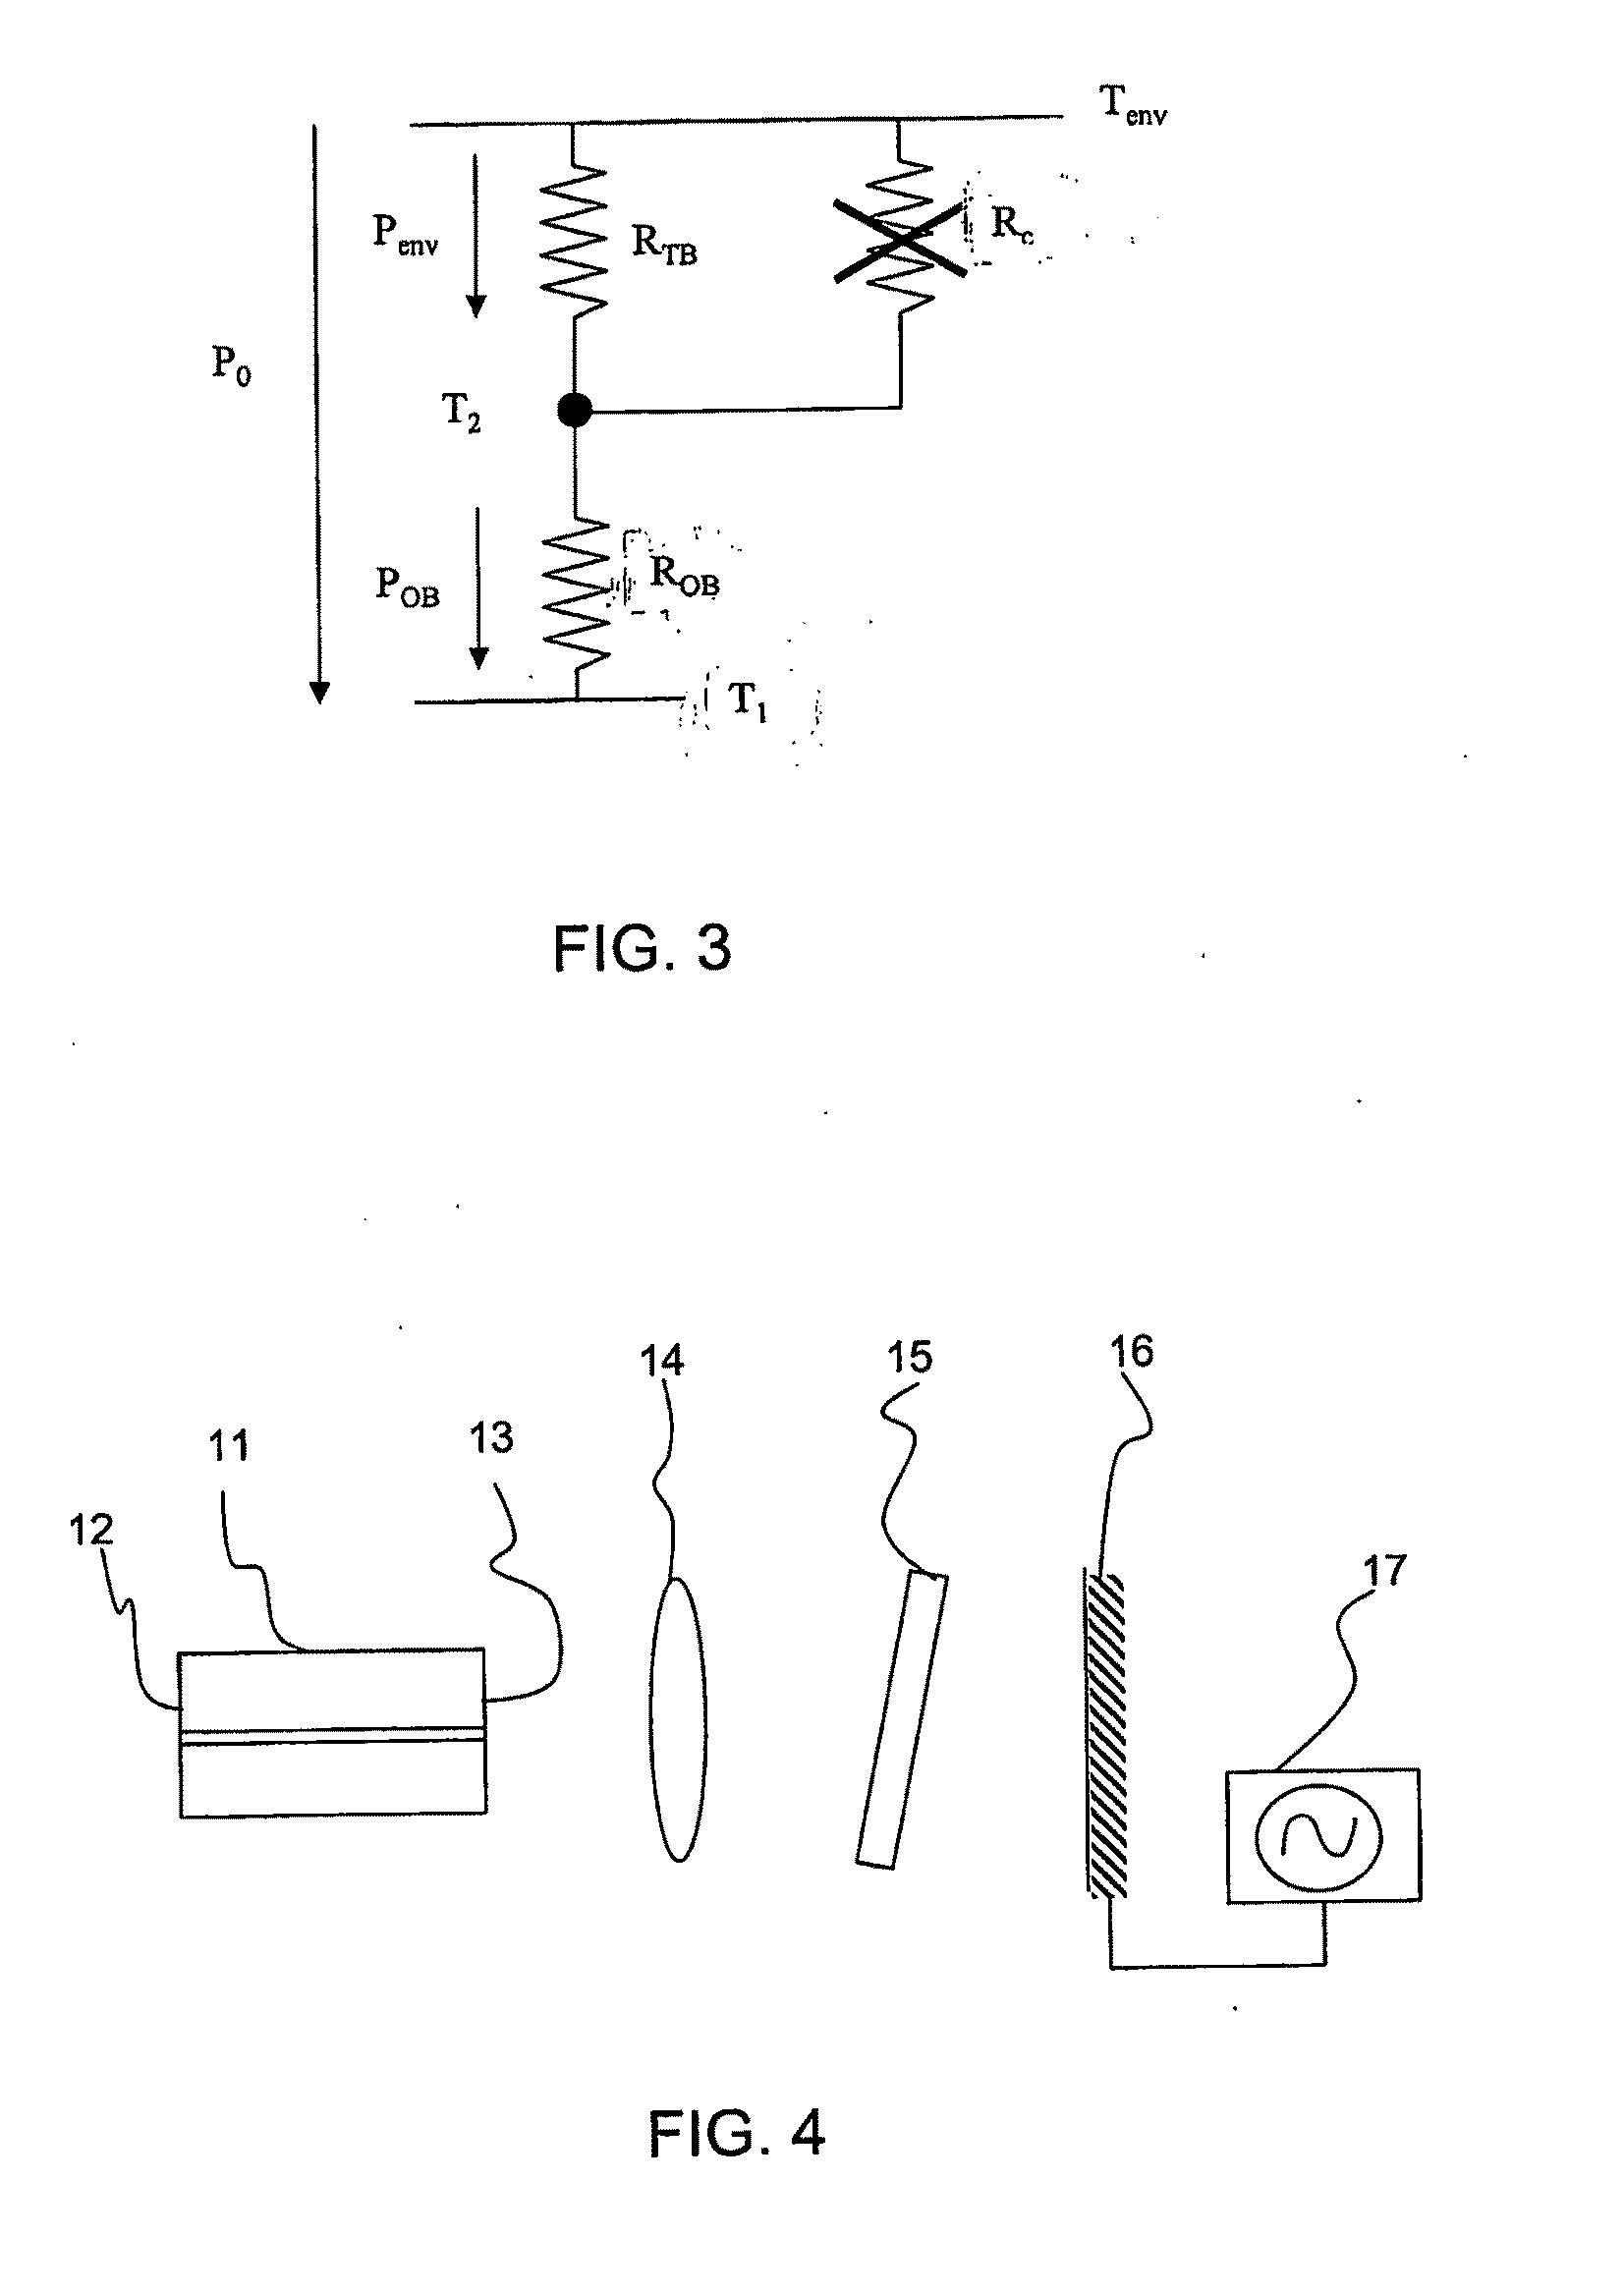 Passive Phase Control in an External Cavity Laser